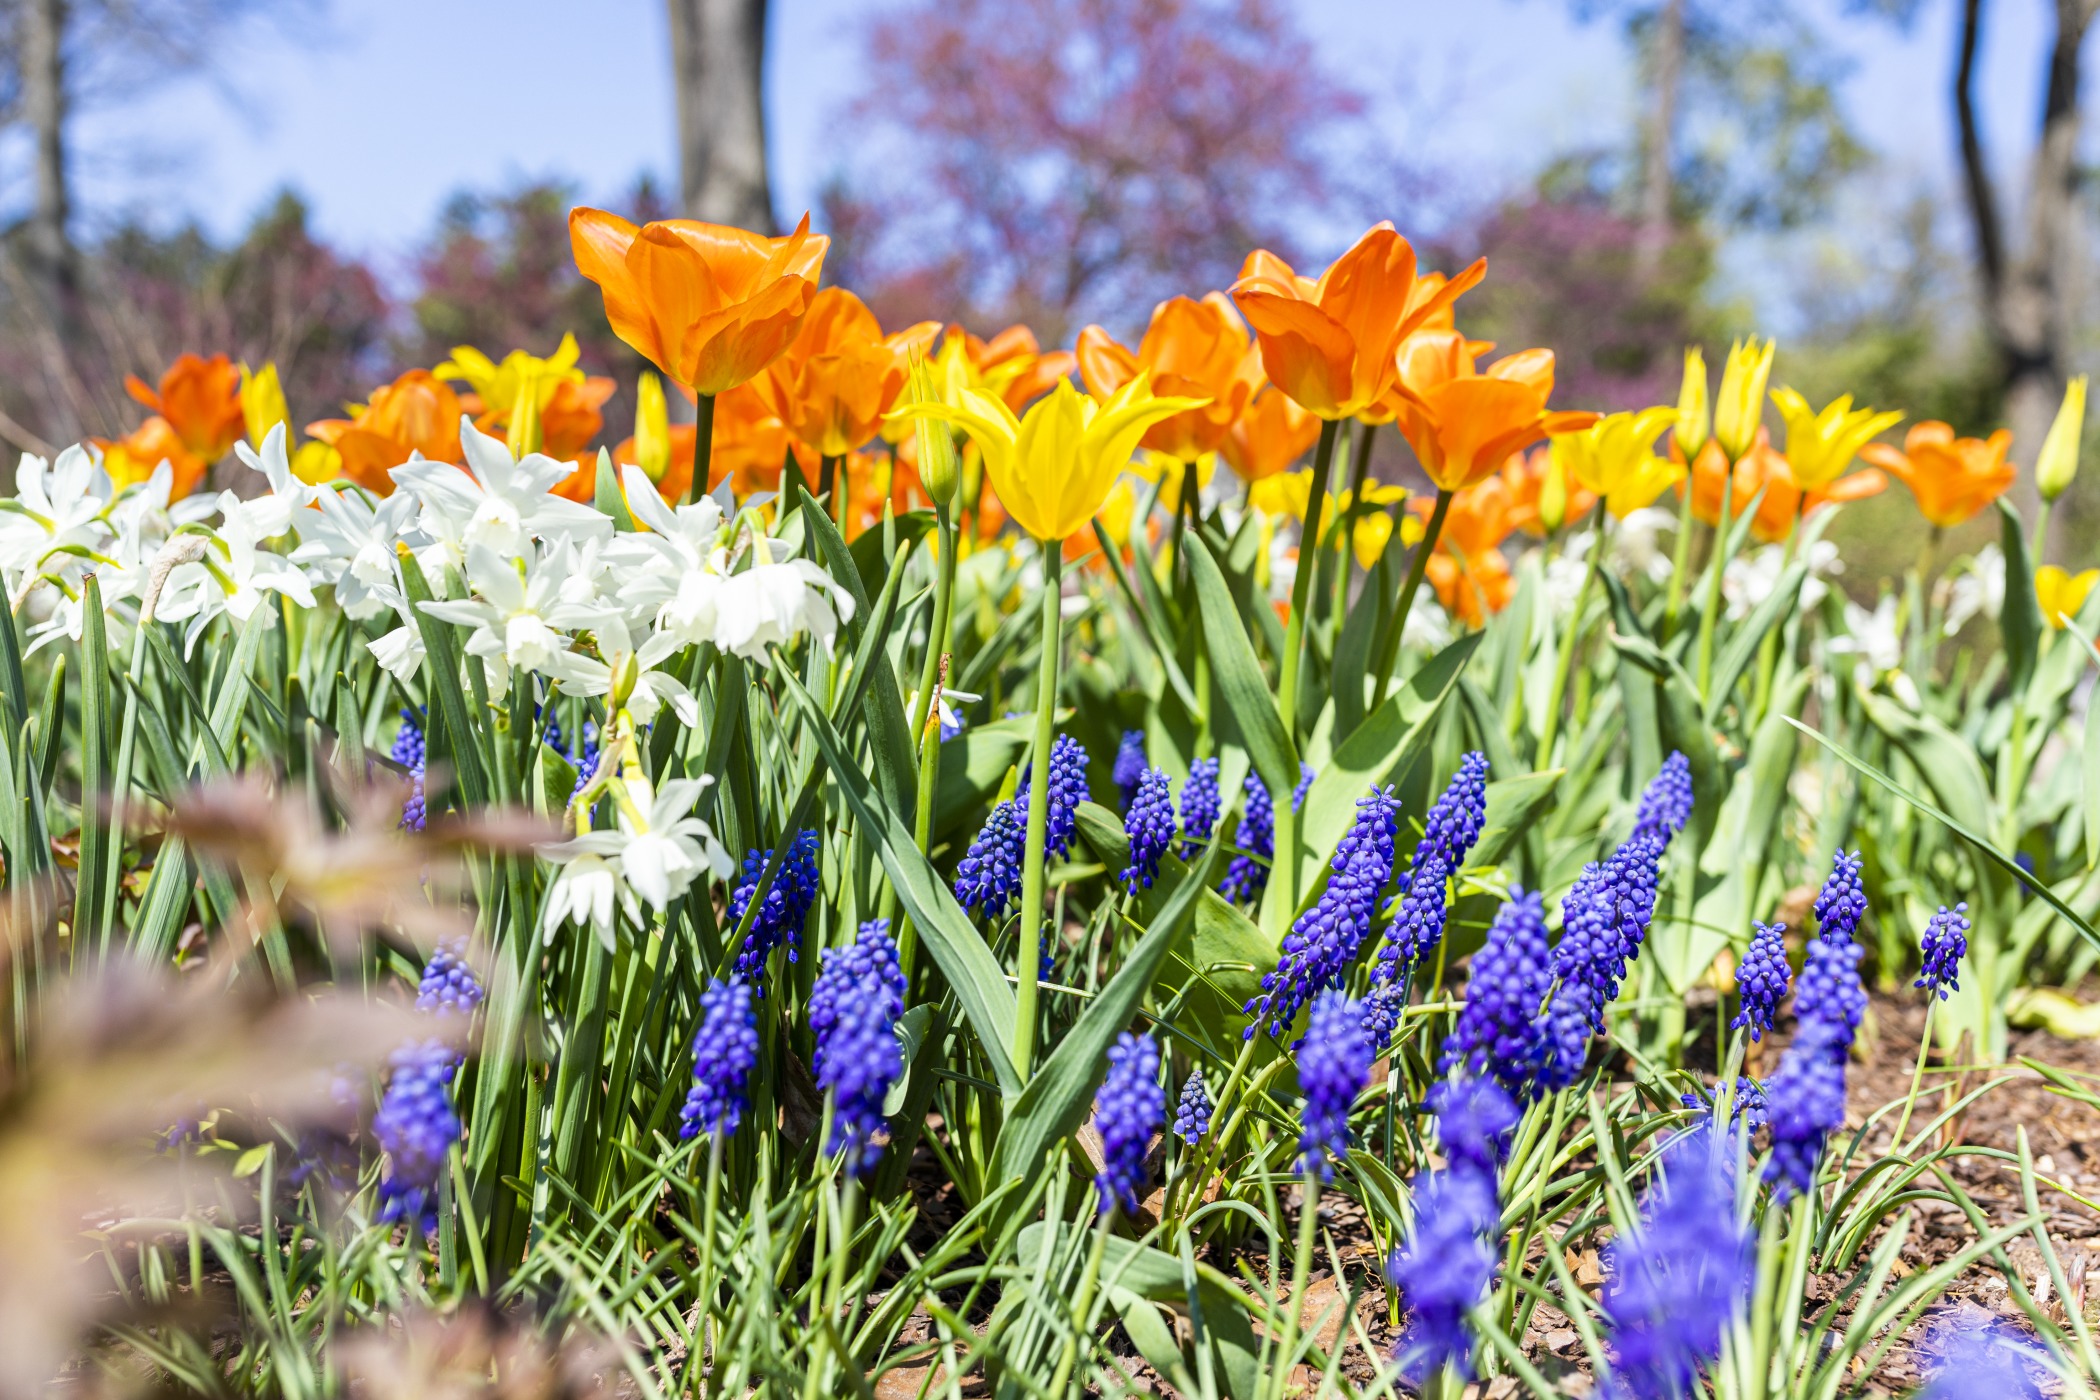 Spring flowers at Newfields. Image courtesy of Newfields.